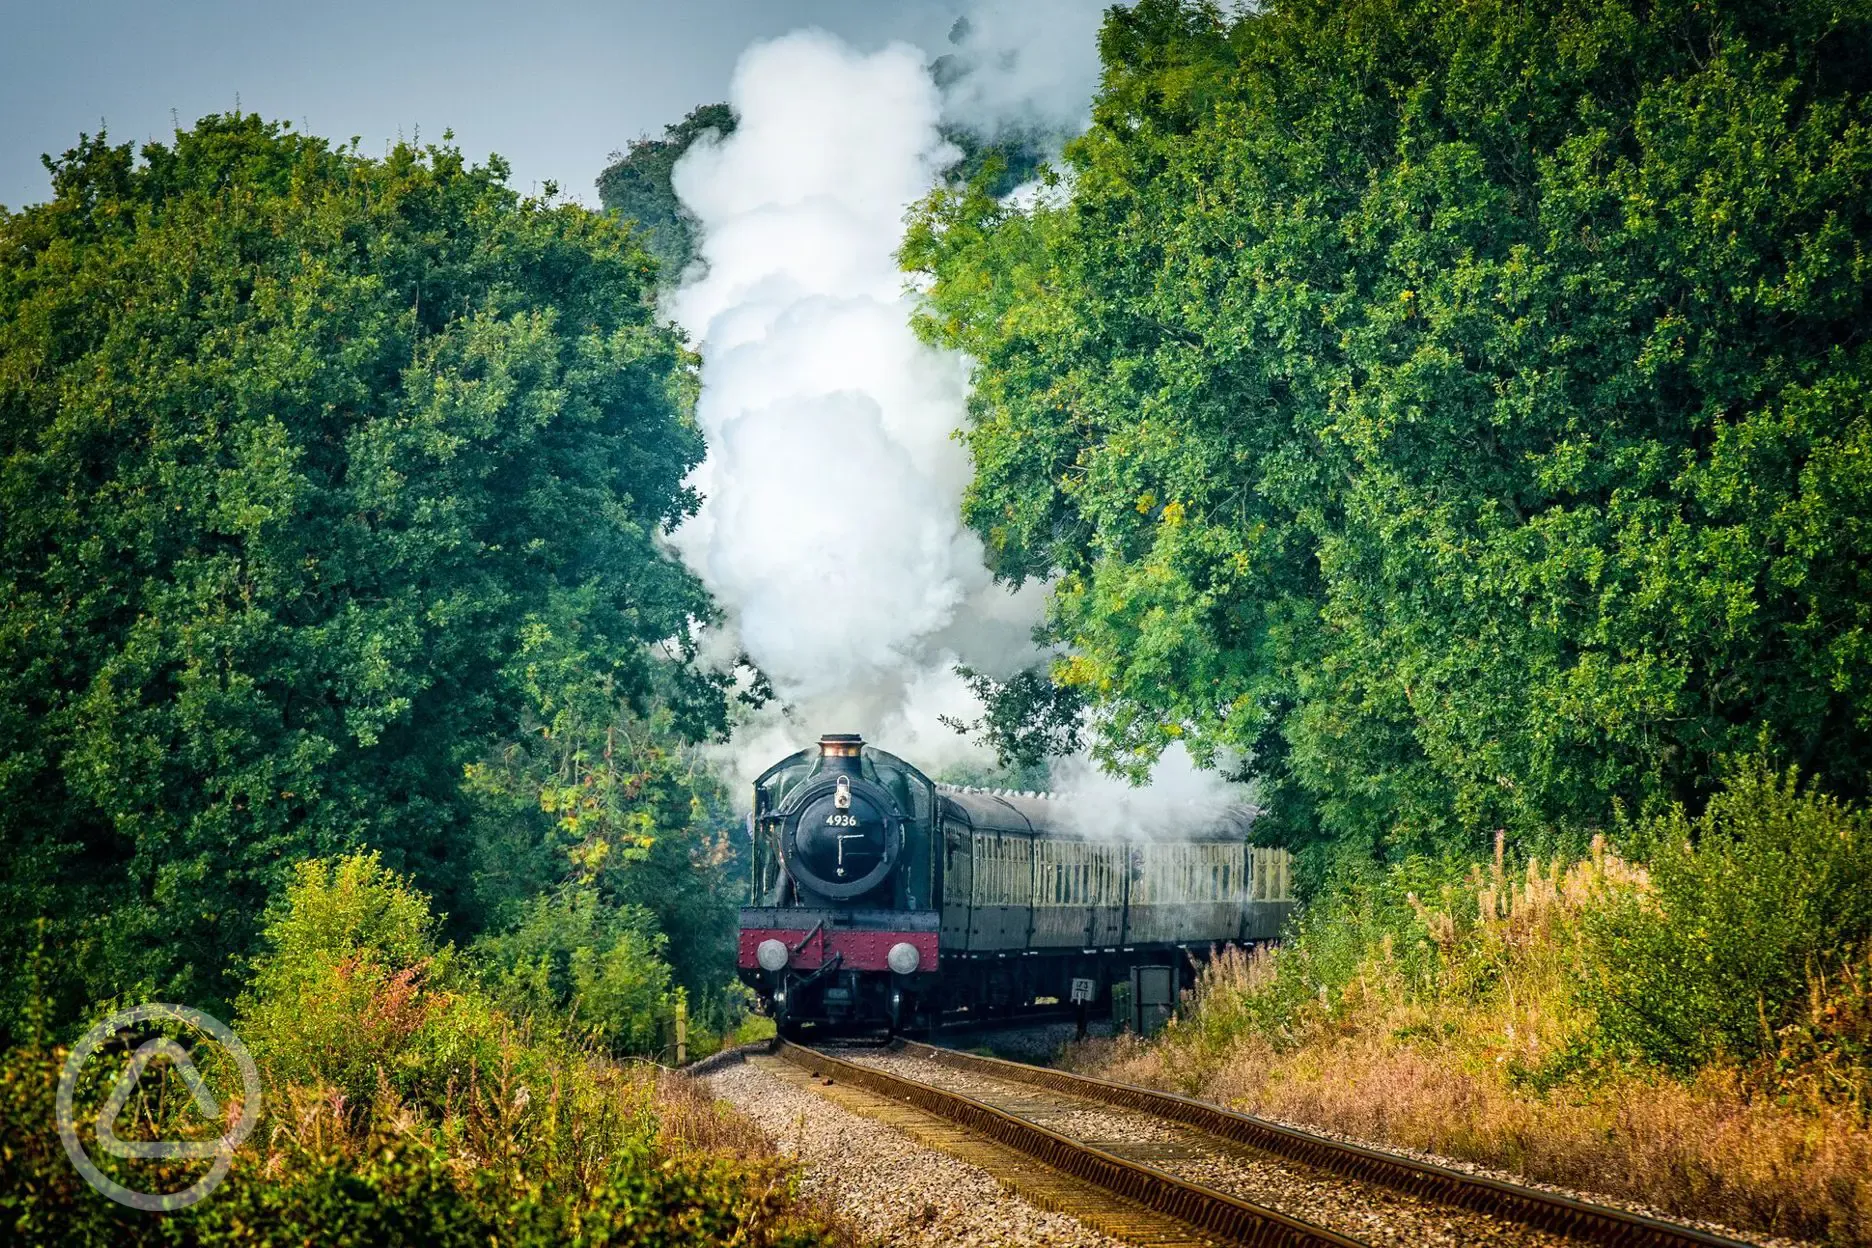 One of the local attractions is The West Somerset Railway